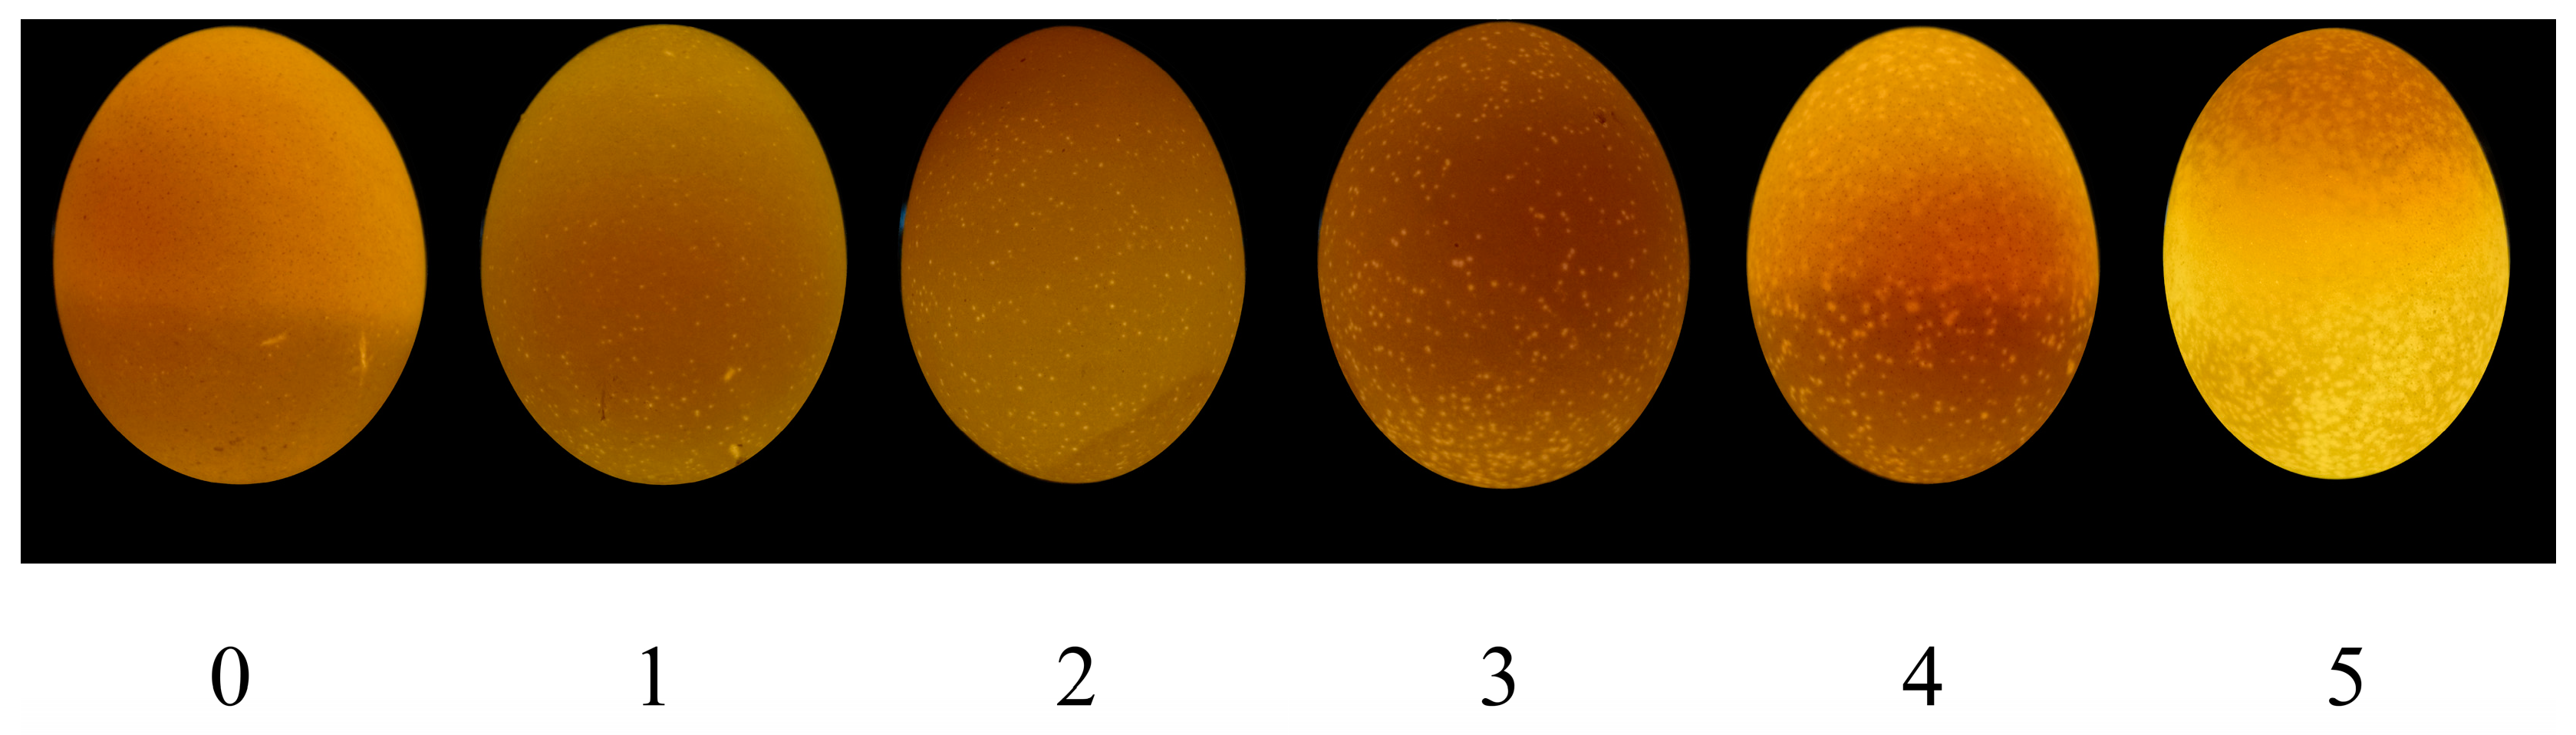 Egg-candling, image acquisition of the samples' upper view